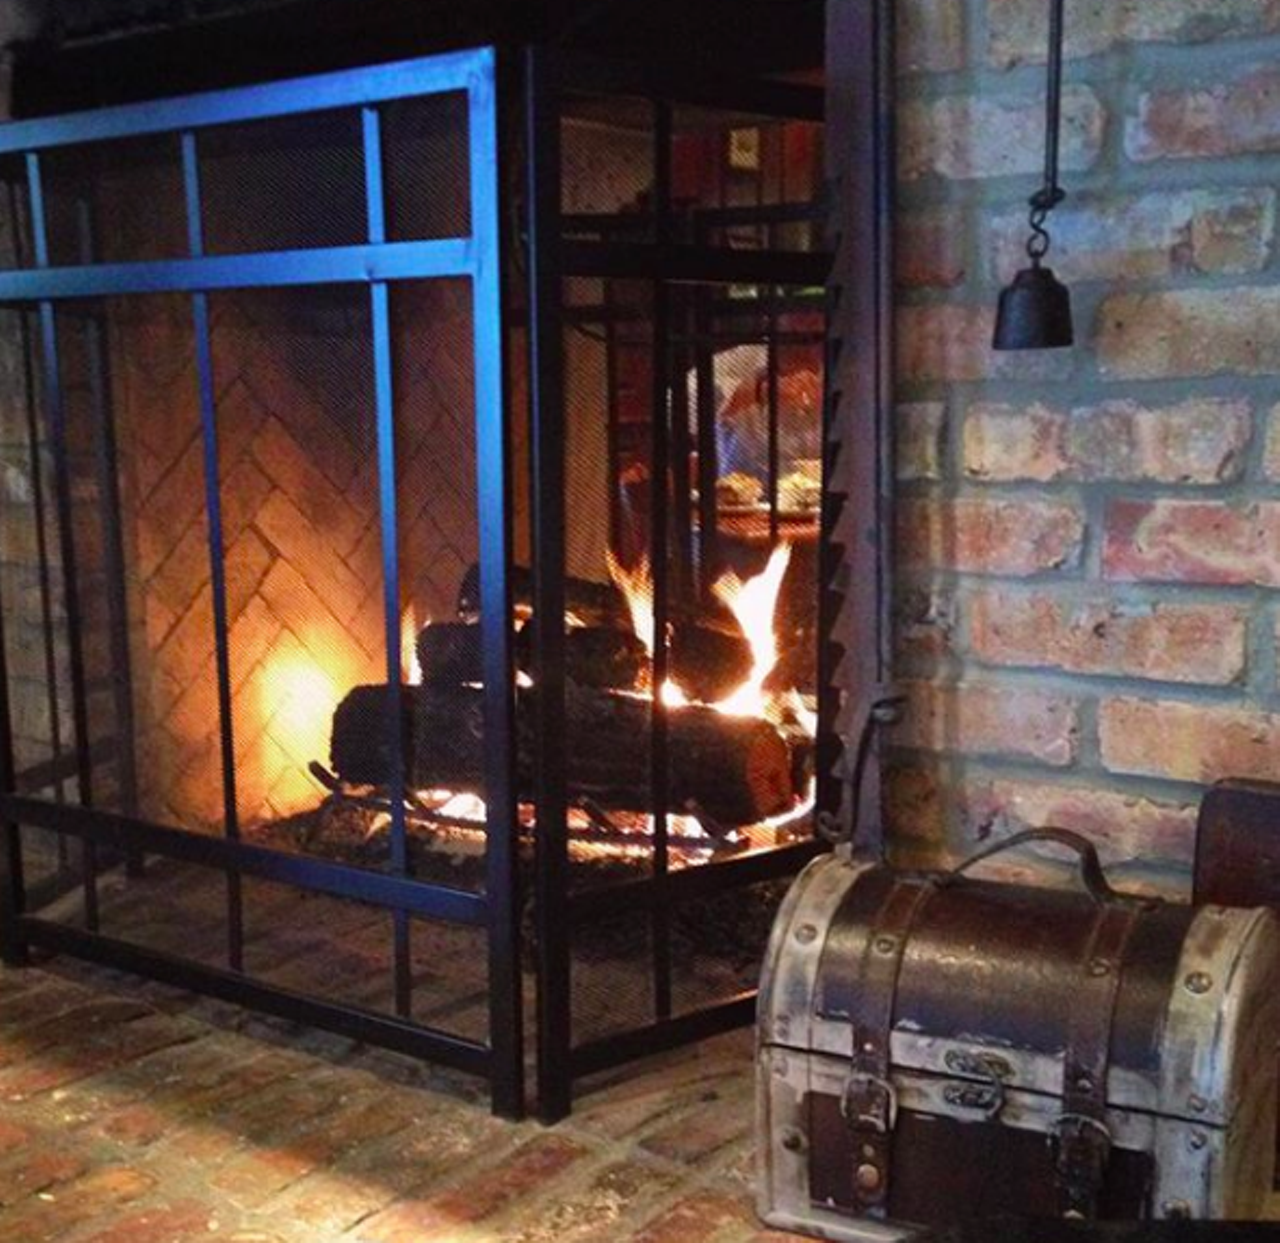 la Madeleine French Bakery & Café
Multiple locations, lamadeleine.com
This Dallas-based chain comes in clutch with its fireplace. For bites like quiche or a French dip and a seat next to a fire in a gorgeous space, you’ll definitely want to visit la Madeleine.
Photo via Instagram / beingmisty